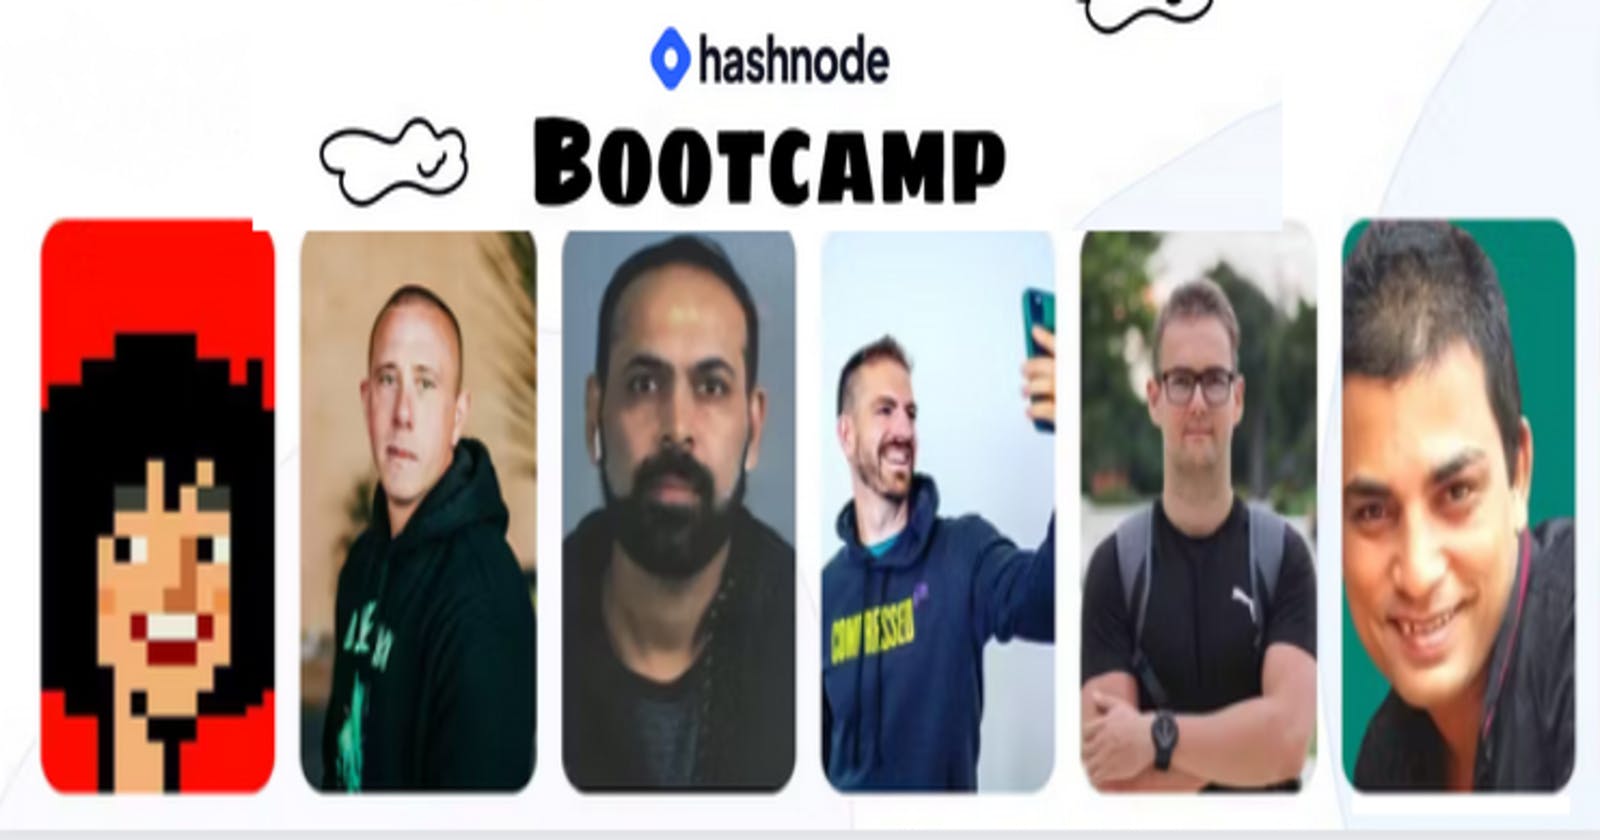 What did I learn at Hashnode Bootcamp?